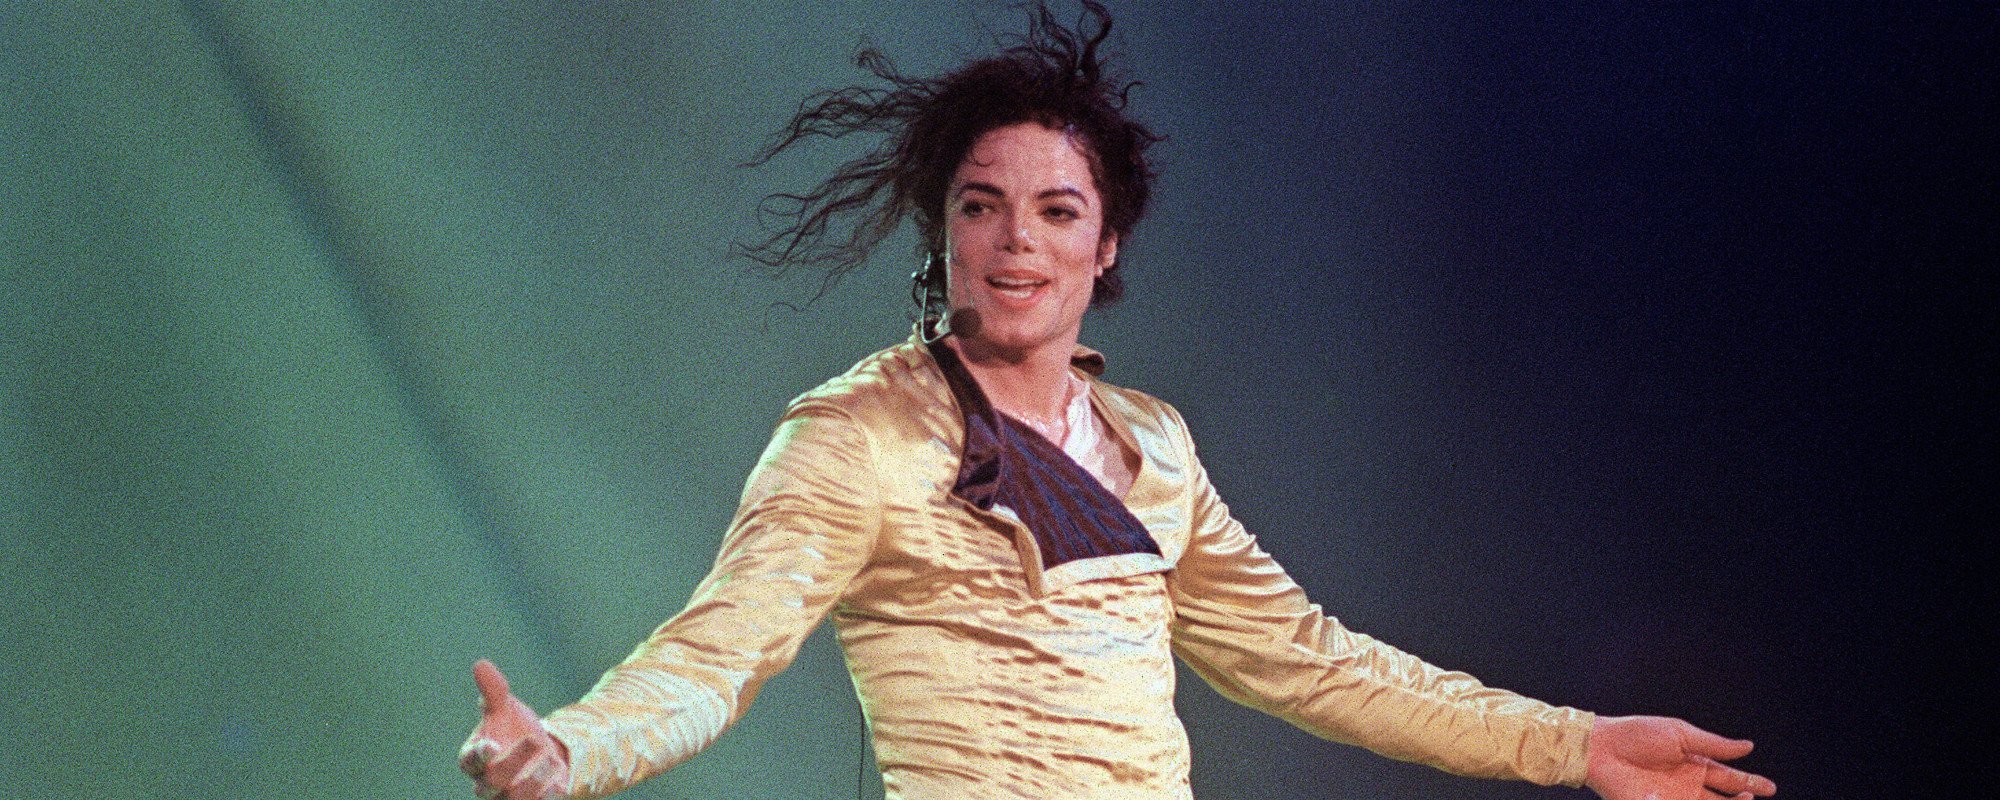 Did you know Michael Jackson wrote these classic songs for others?